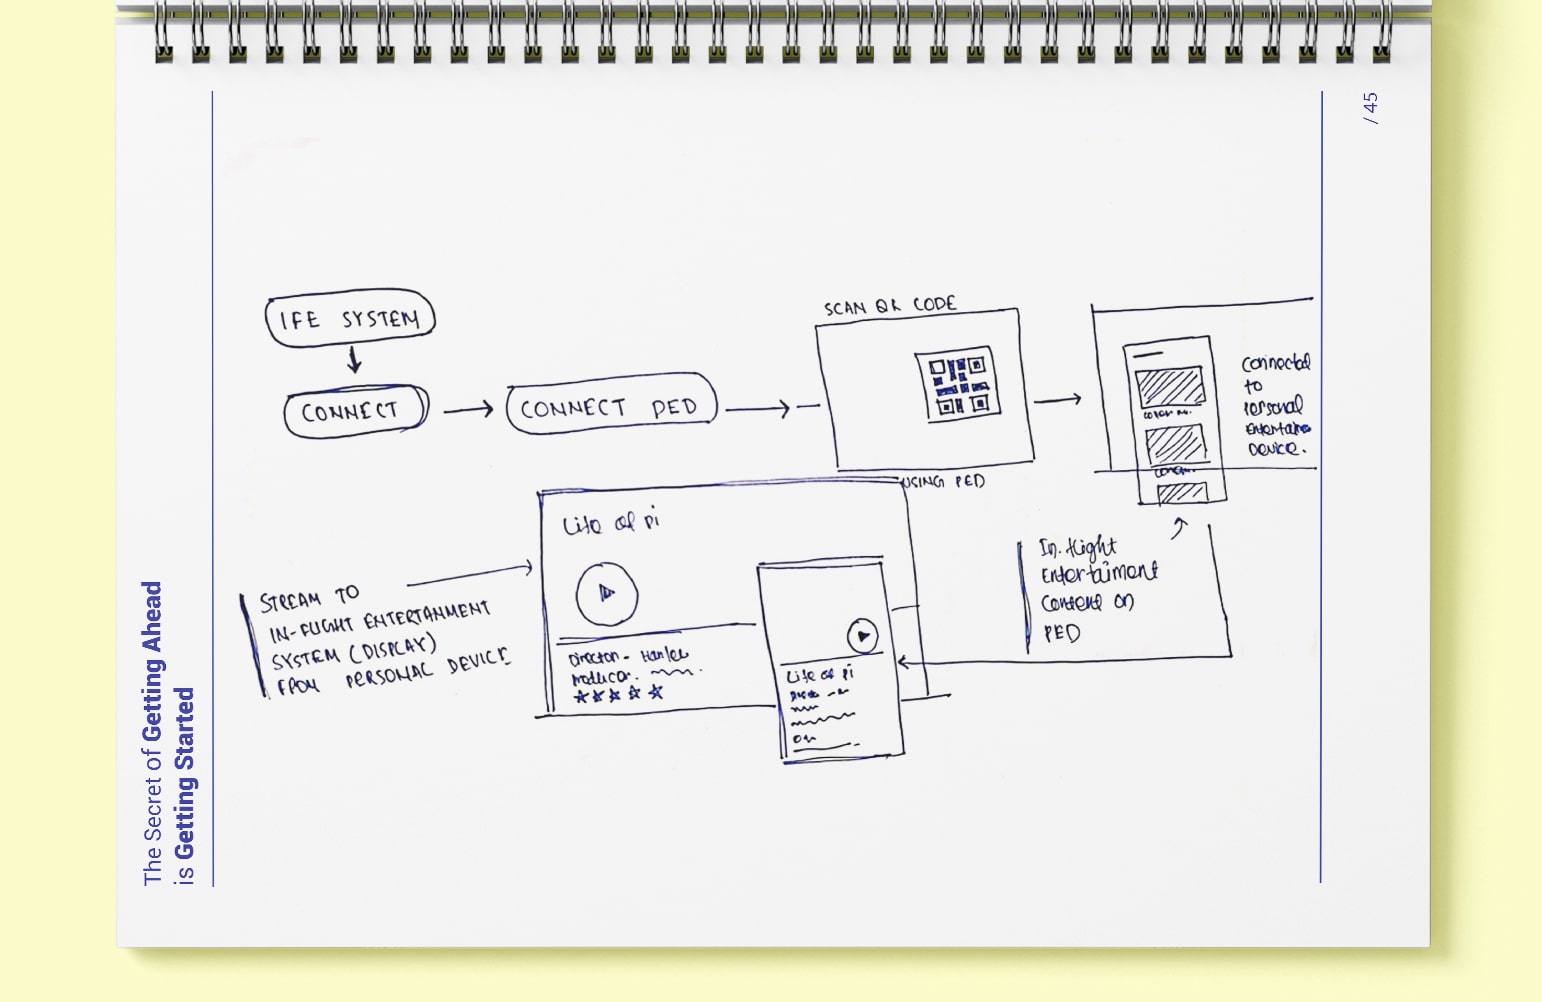 User Navigation Flow, Inflight Entertainment System, User Experience, Wireframe, Brainstorming, UX Design